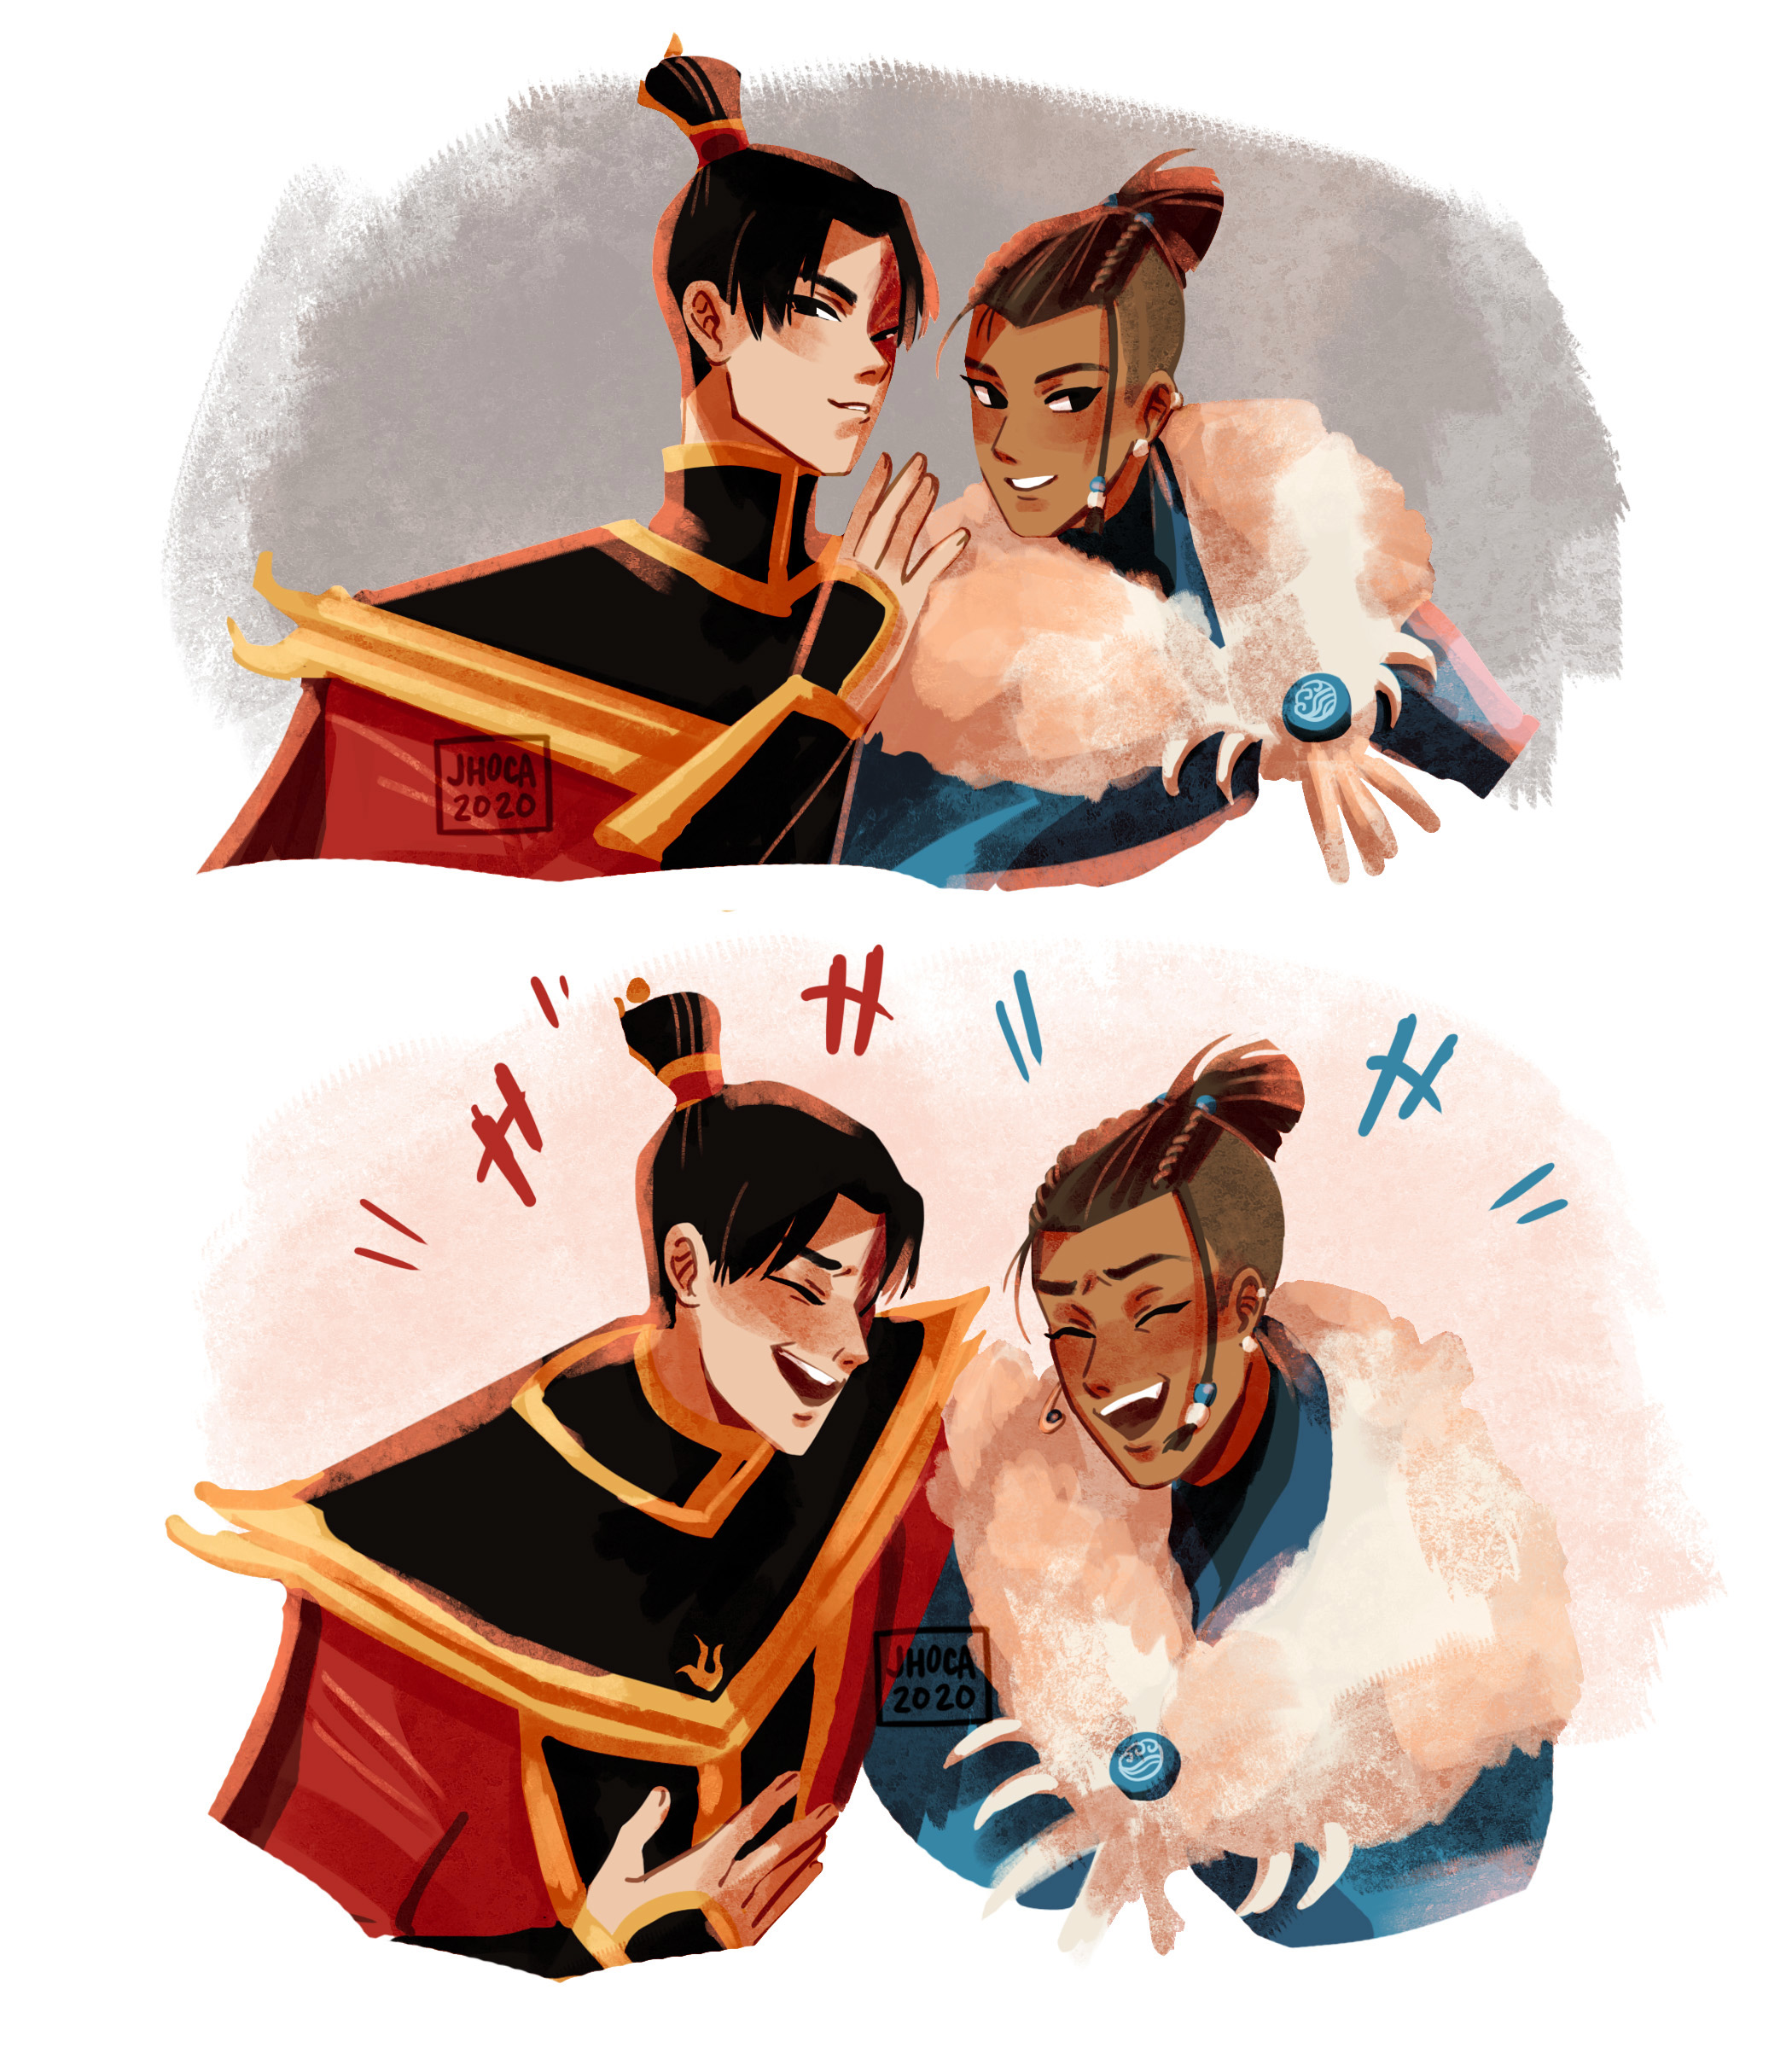 71. I want to remind everyone that at some point bffs zuko and sokka were b...